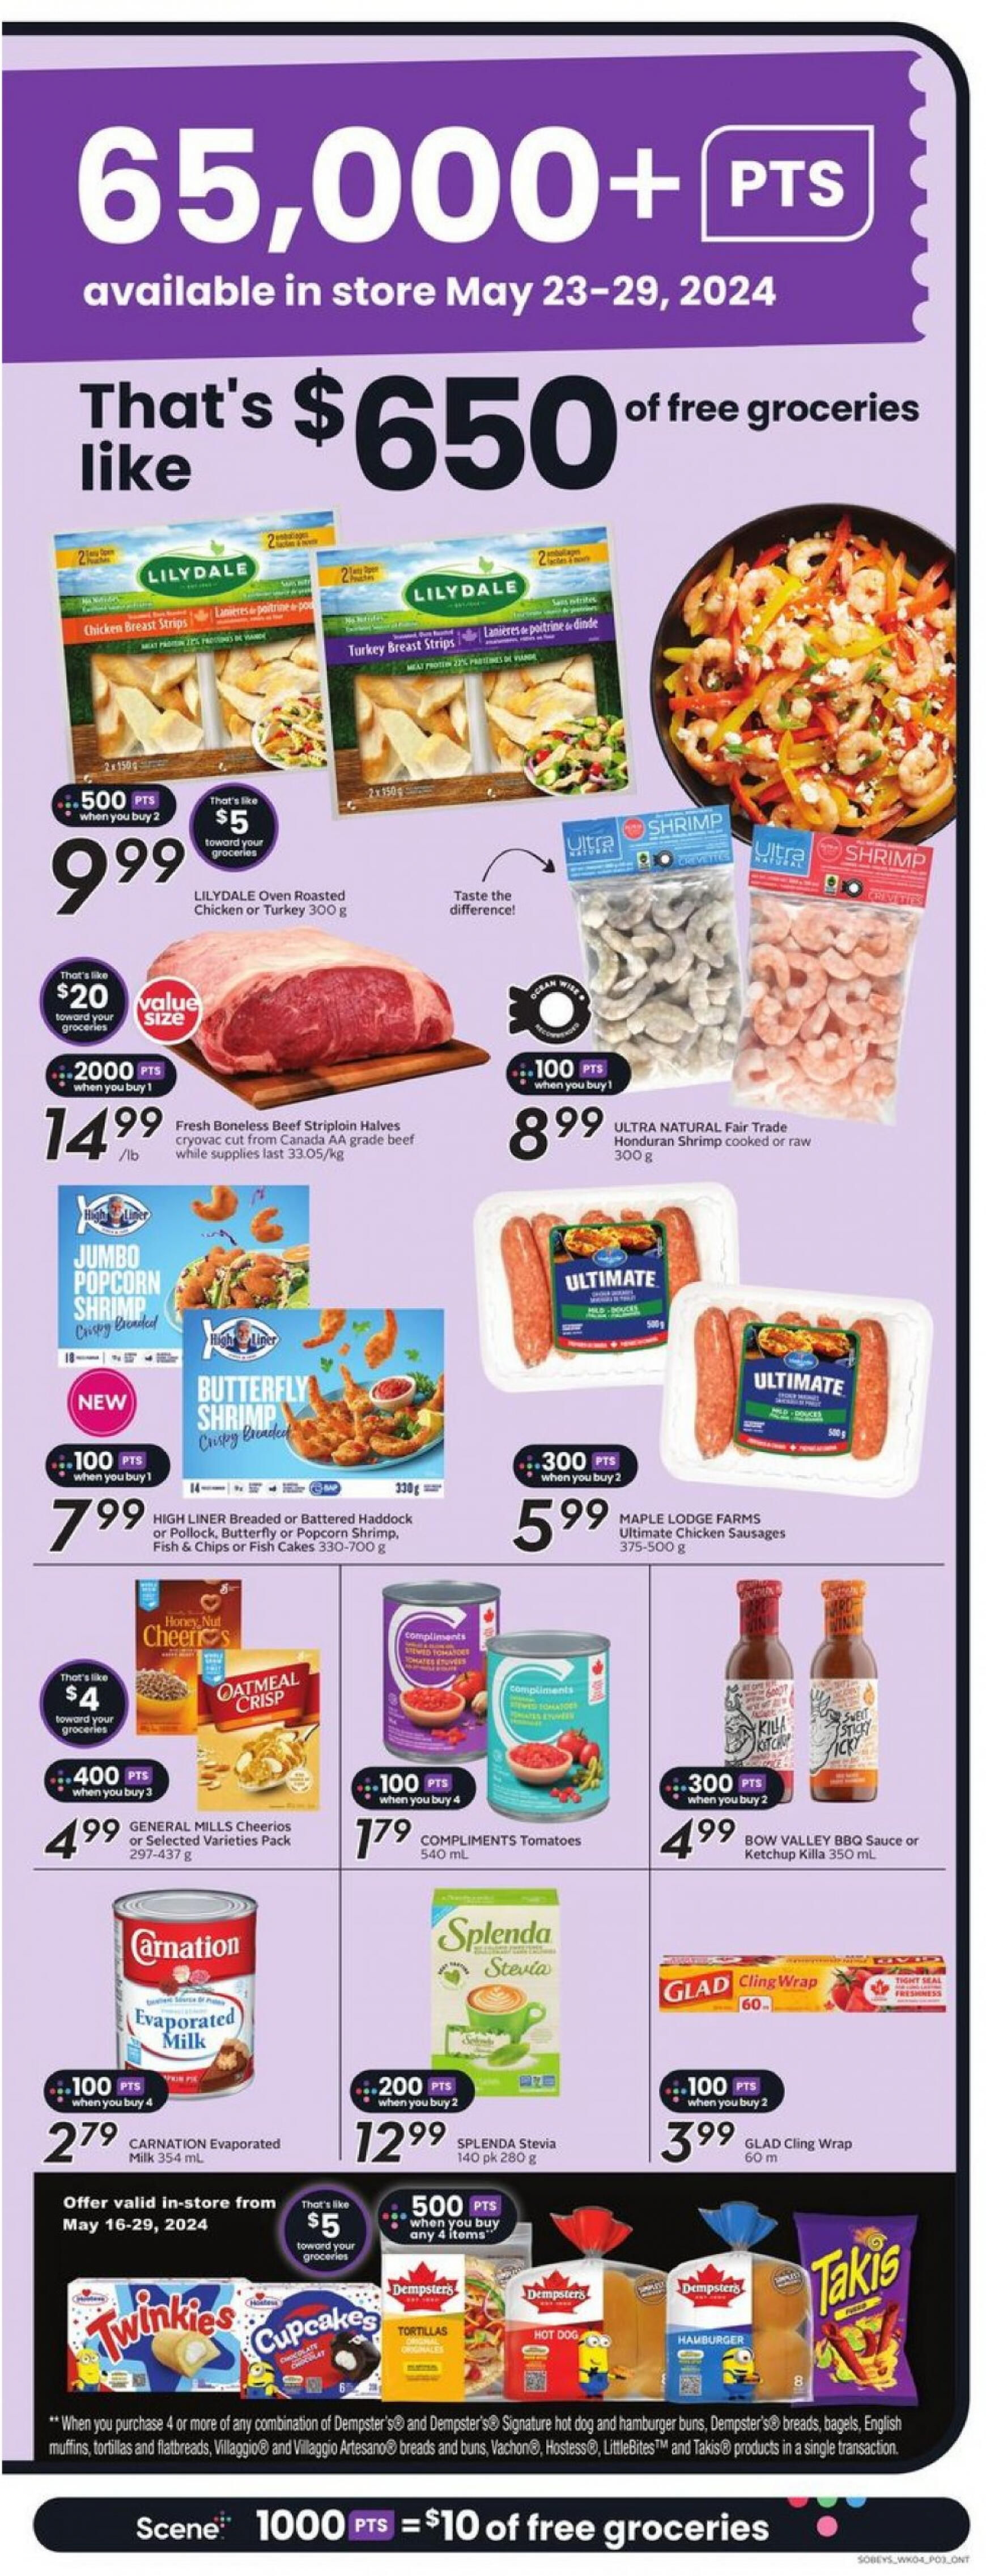 sobeys - Sobeys - Weekly Flyer - Ontario flyer current 23.05. - 29.05. - page: 7